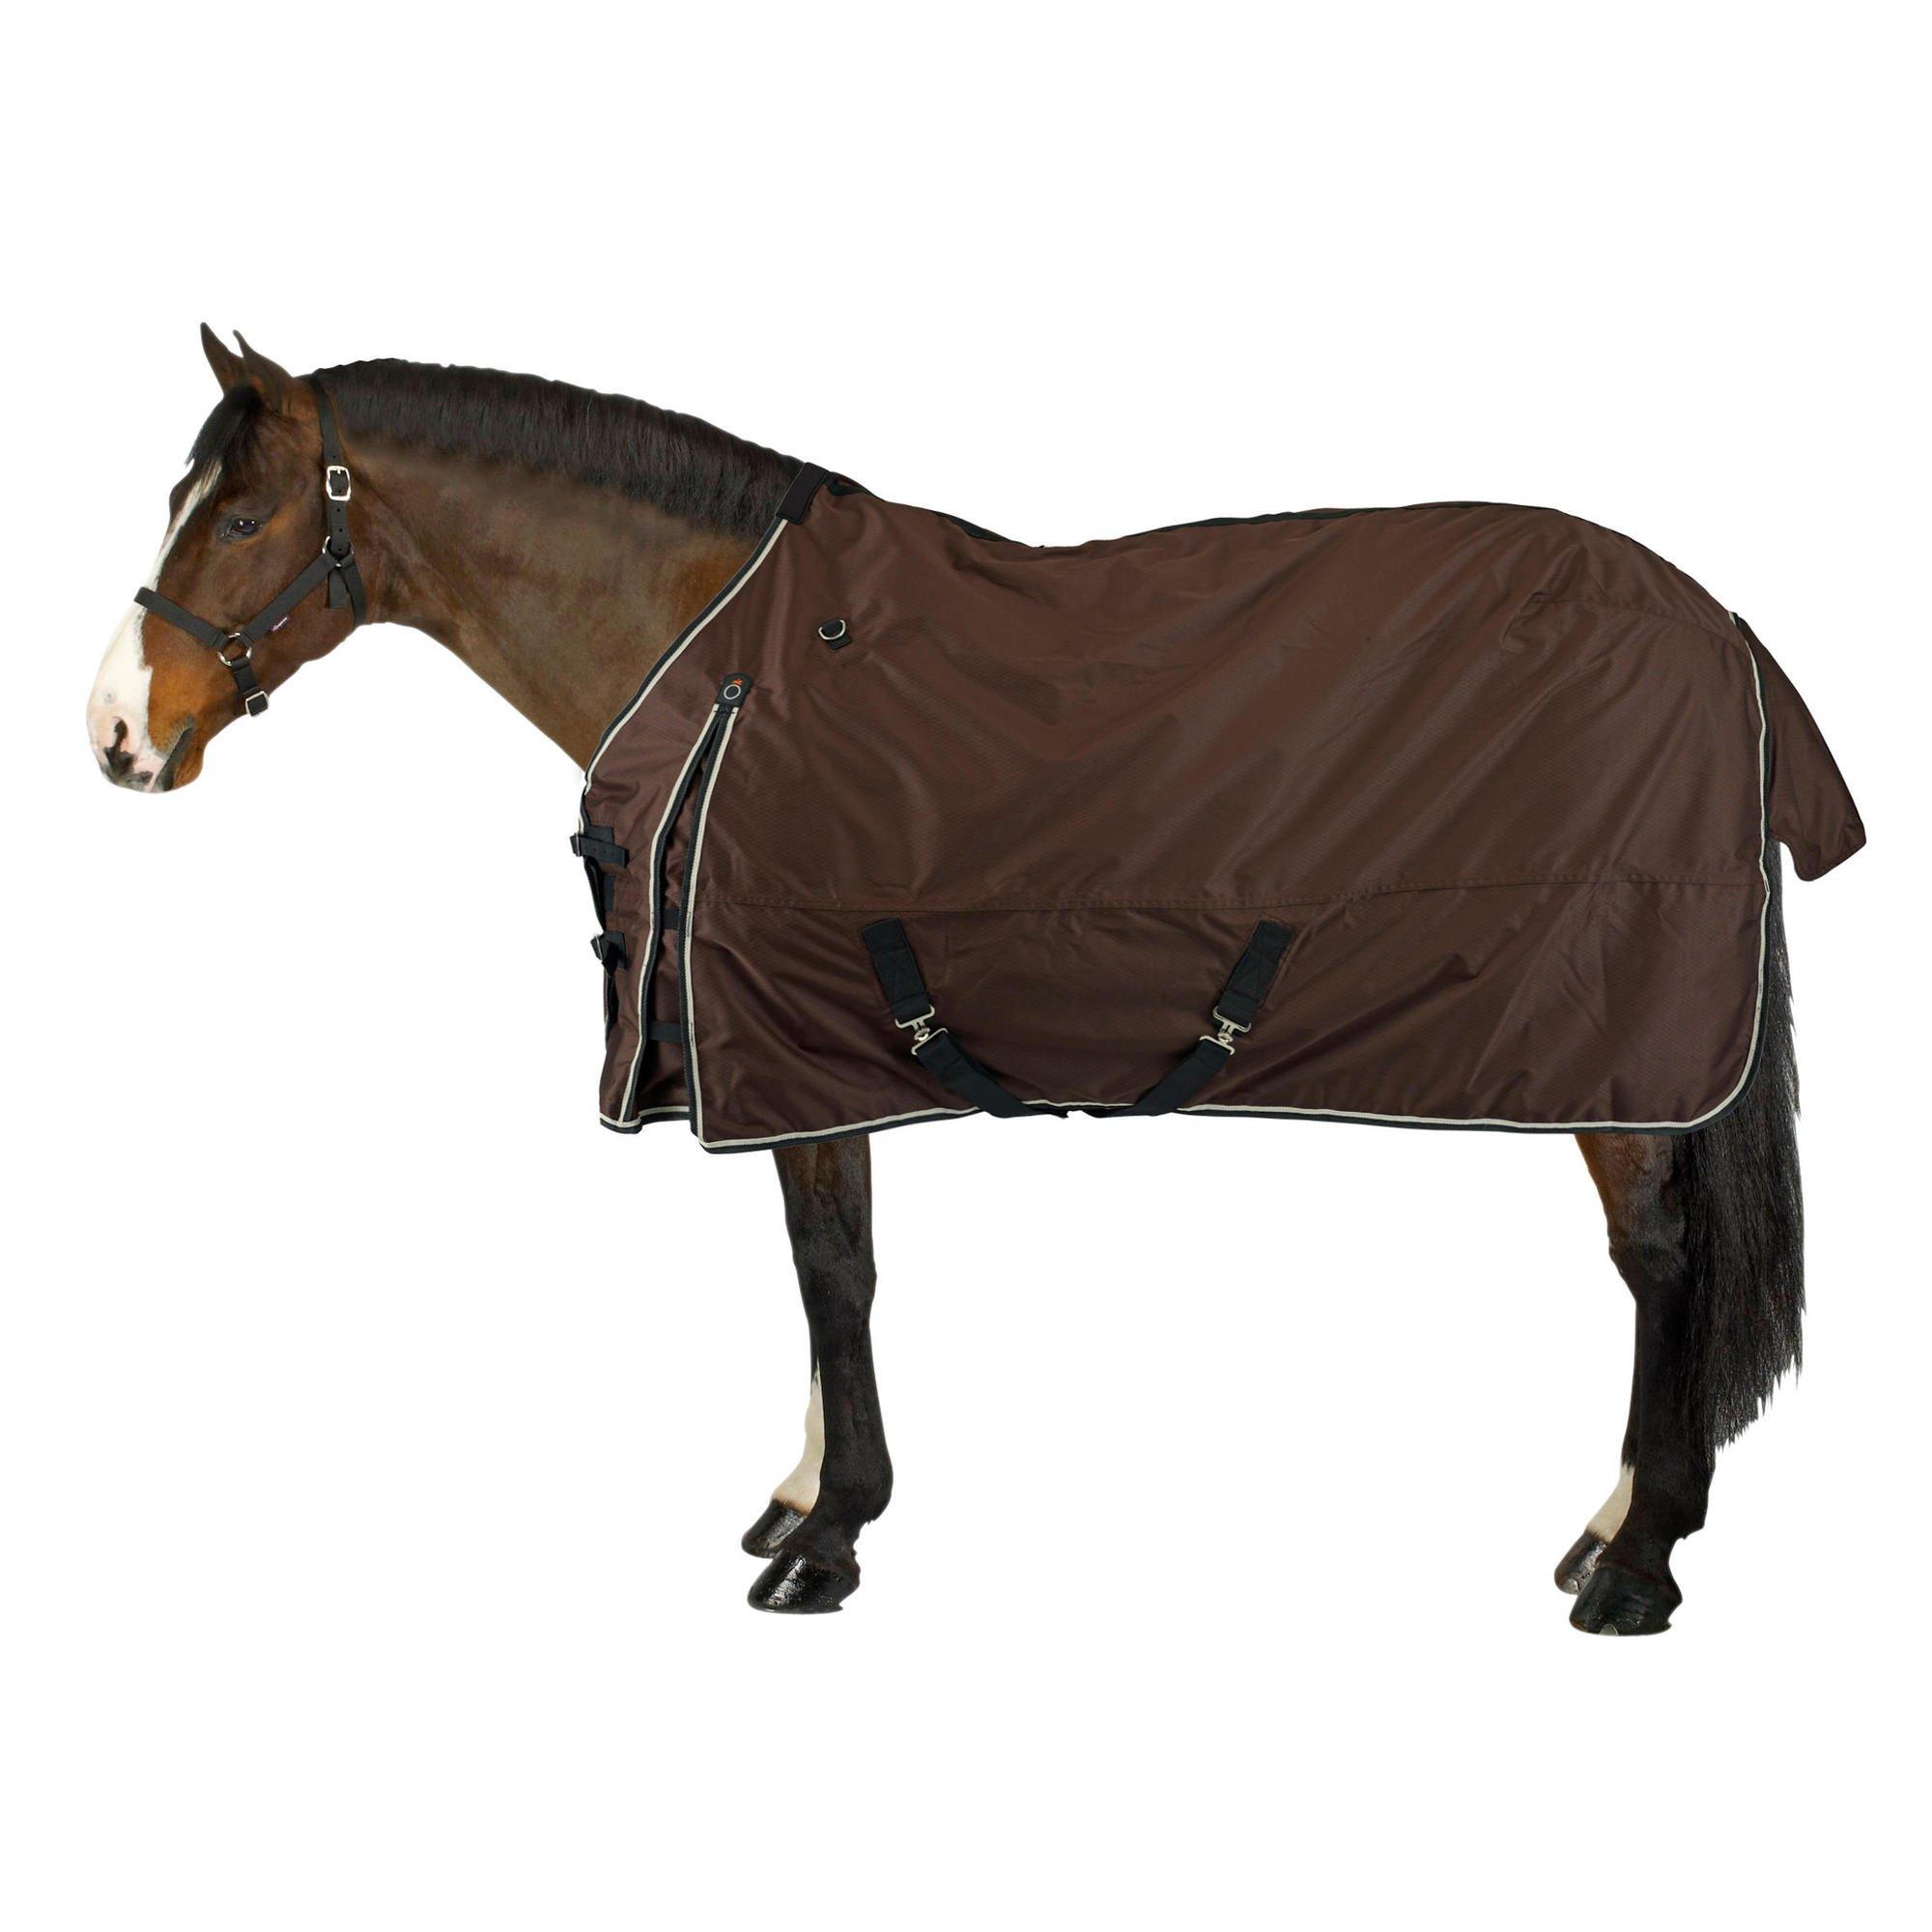 Decathlon Horse Riding Waterproof Turnout Sheet For Horse & Pony Allweather Light